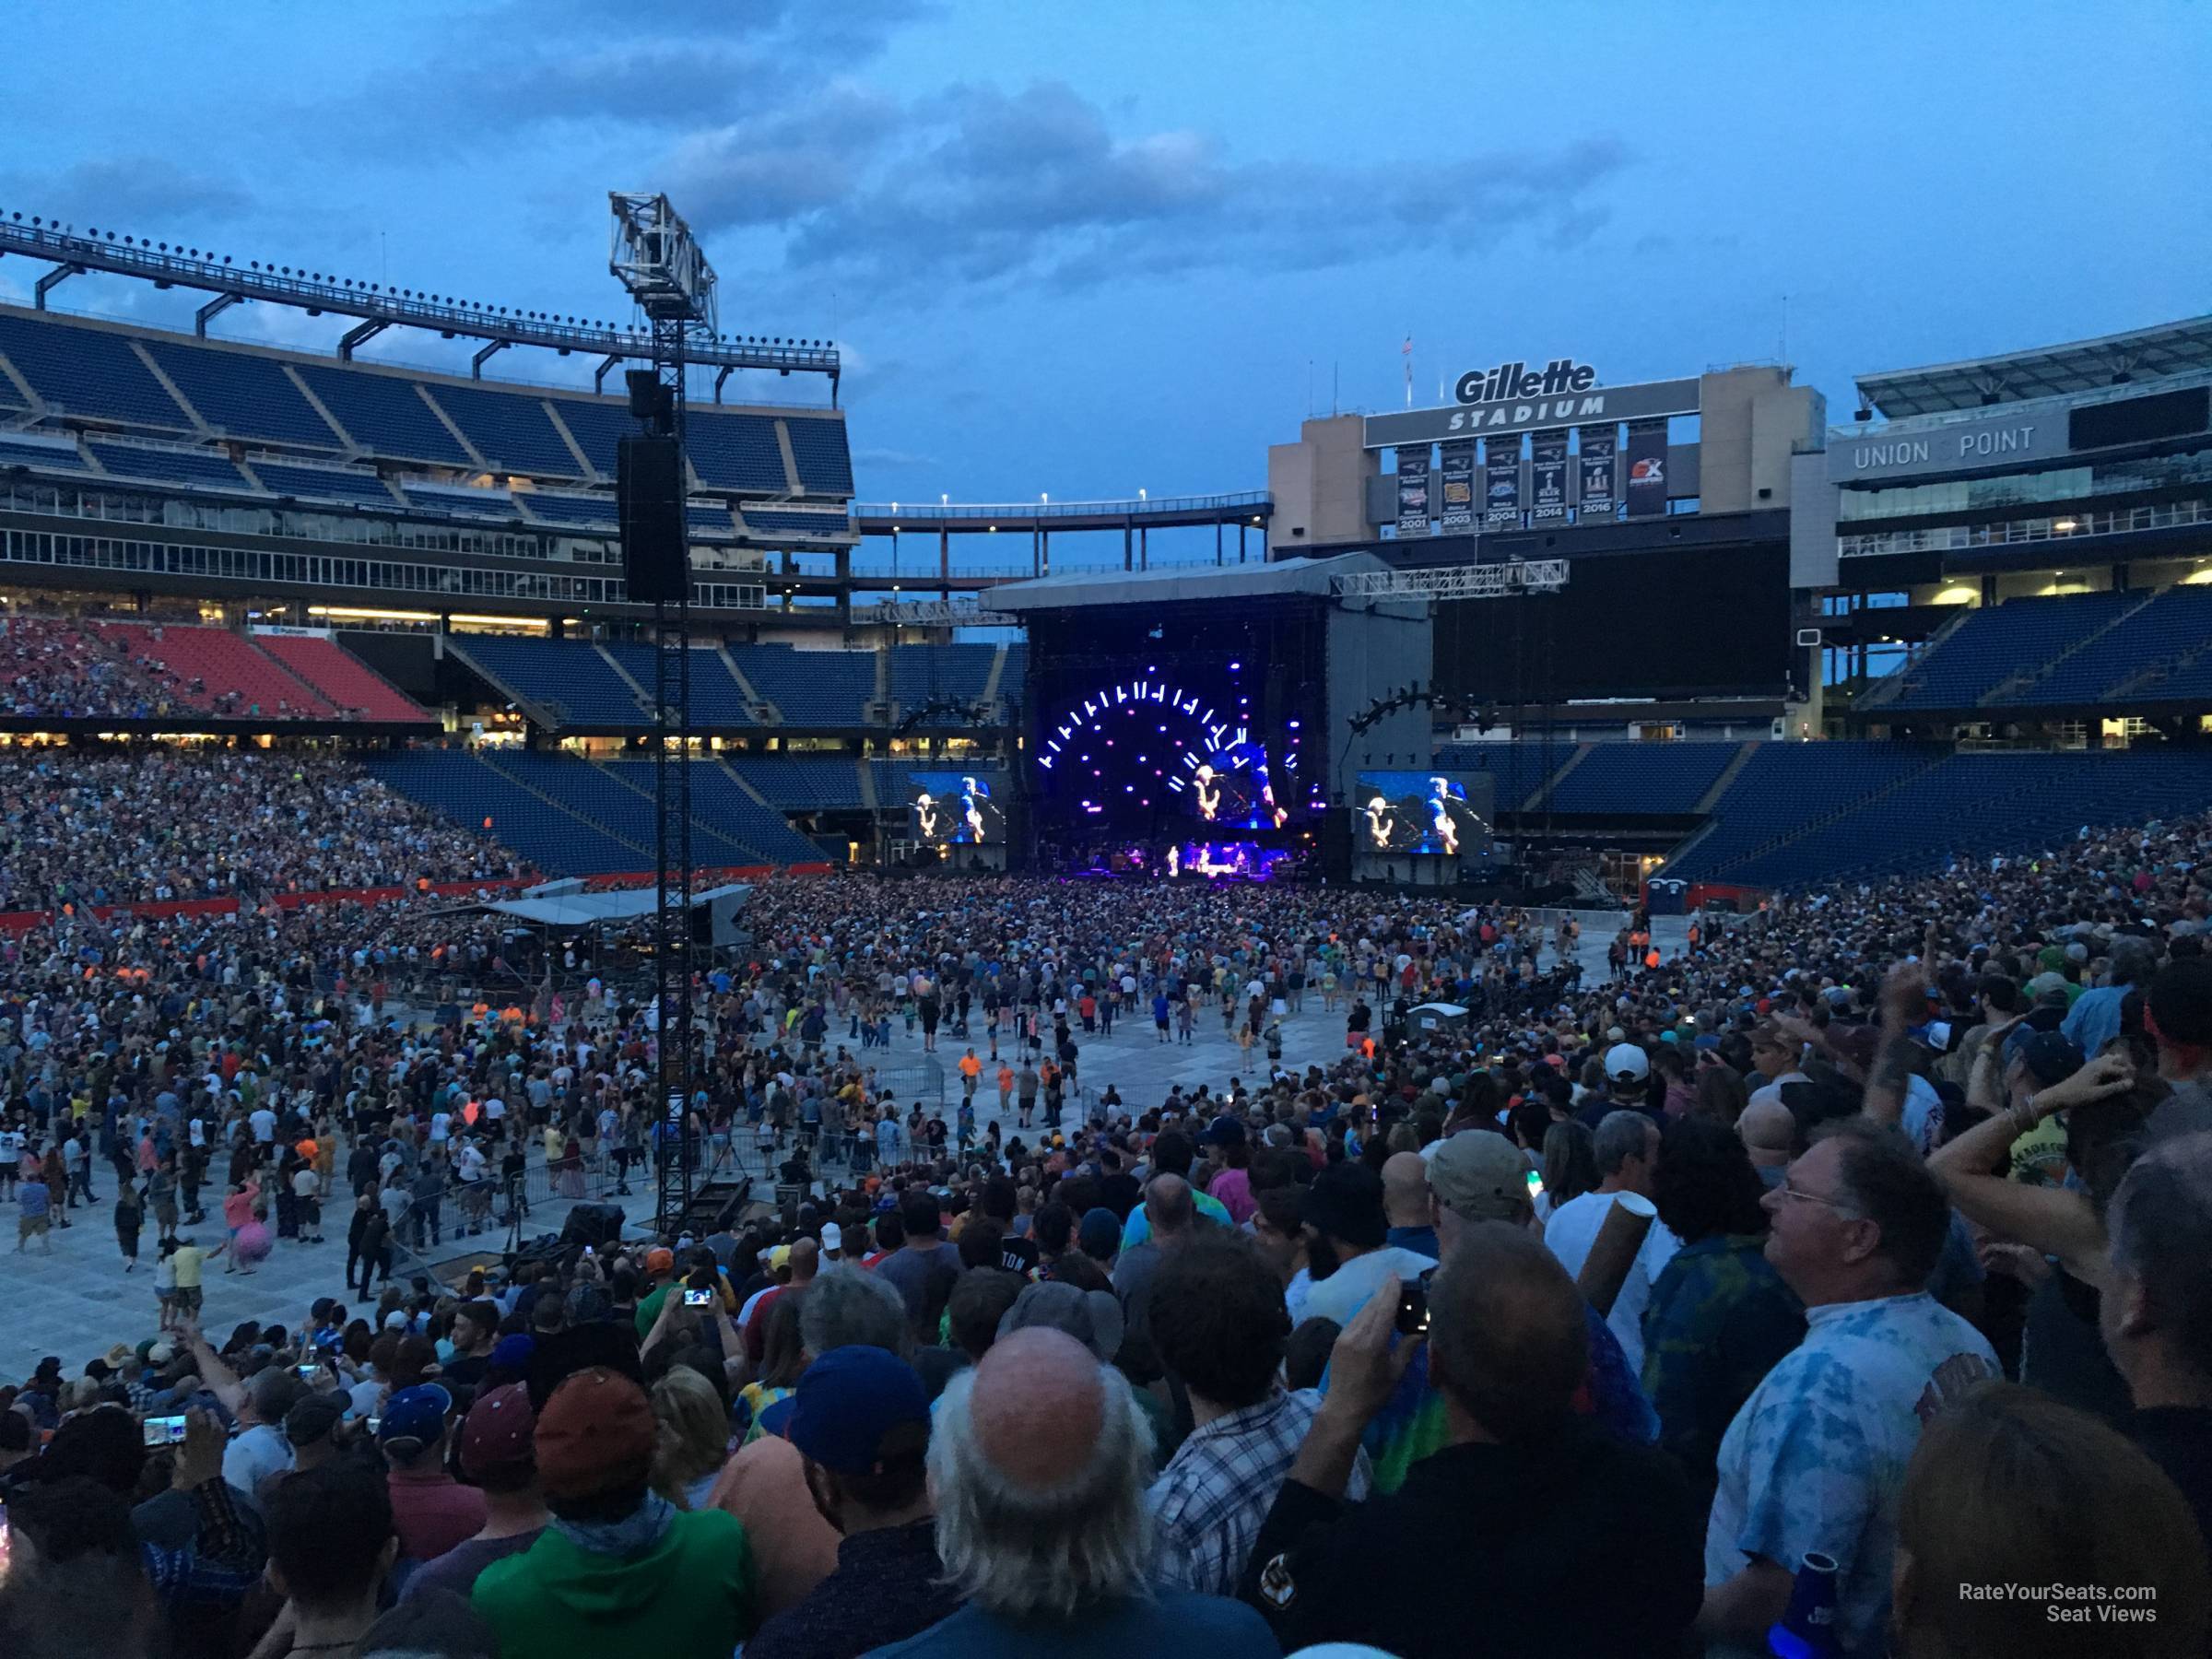 Section 136 at Gillette Stadium for Concerts